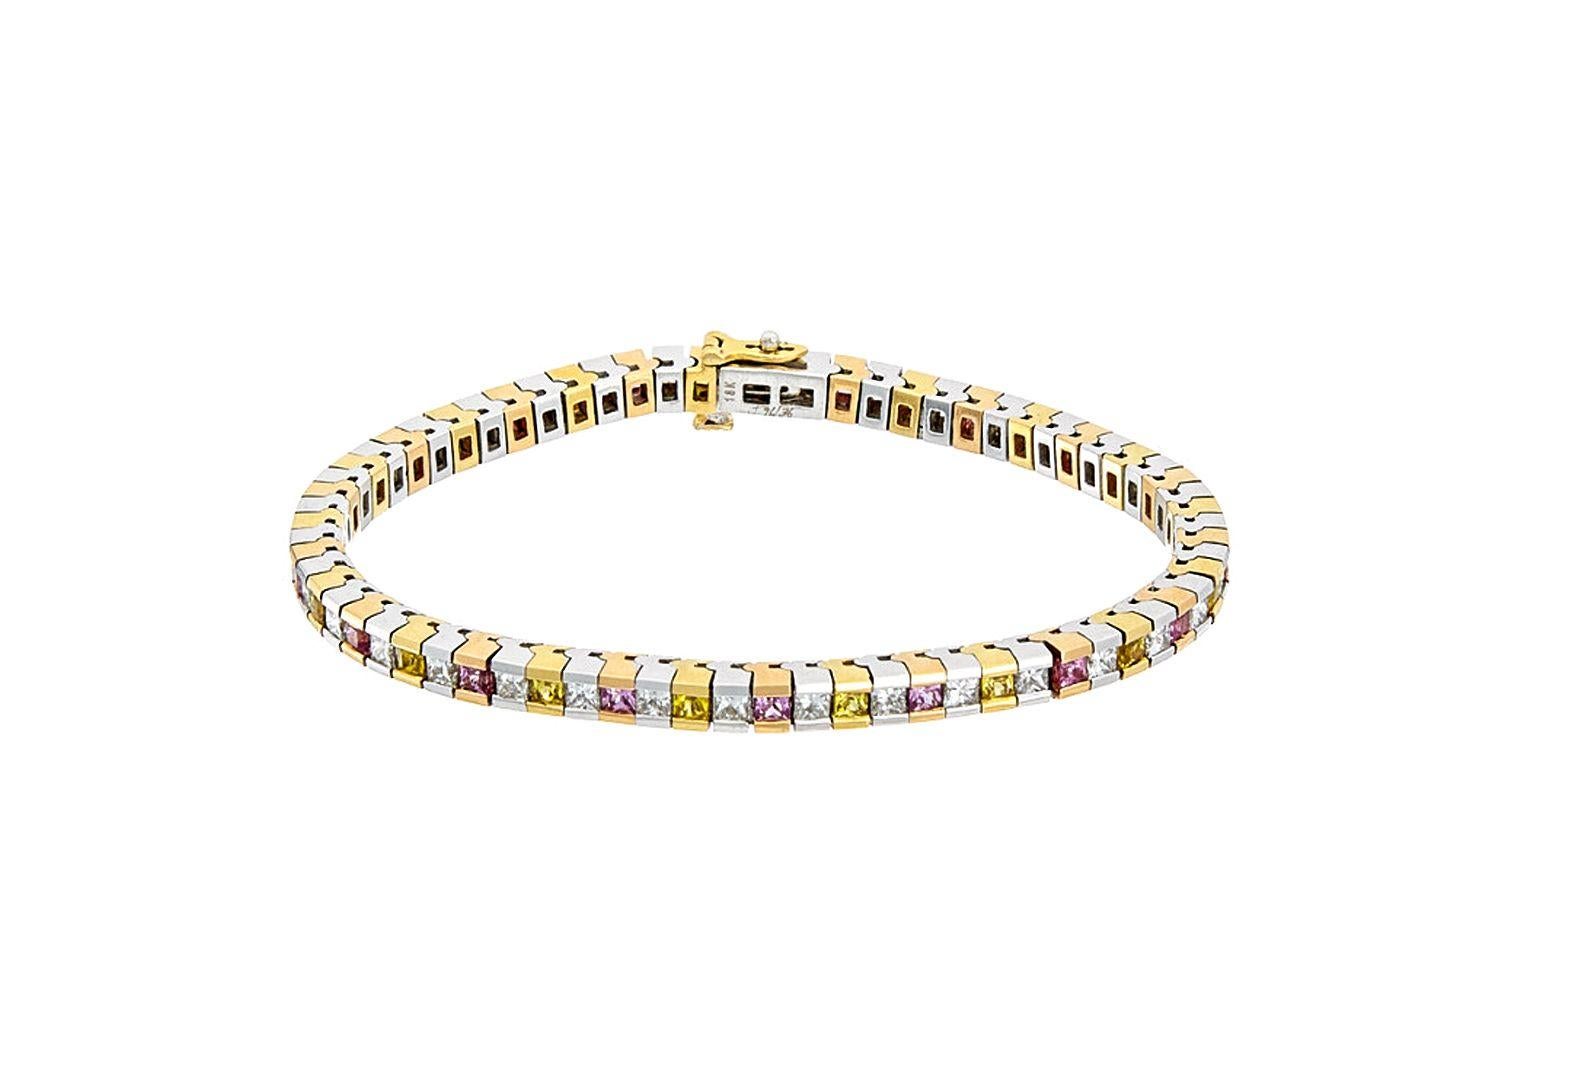 Diana M. 4.84 Carat Pink and Yellow Sapphire Diamond Bracelet In New Condition For Sale In New York, NY